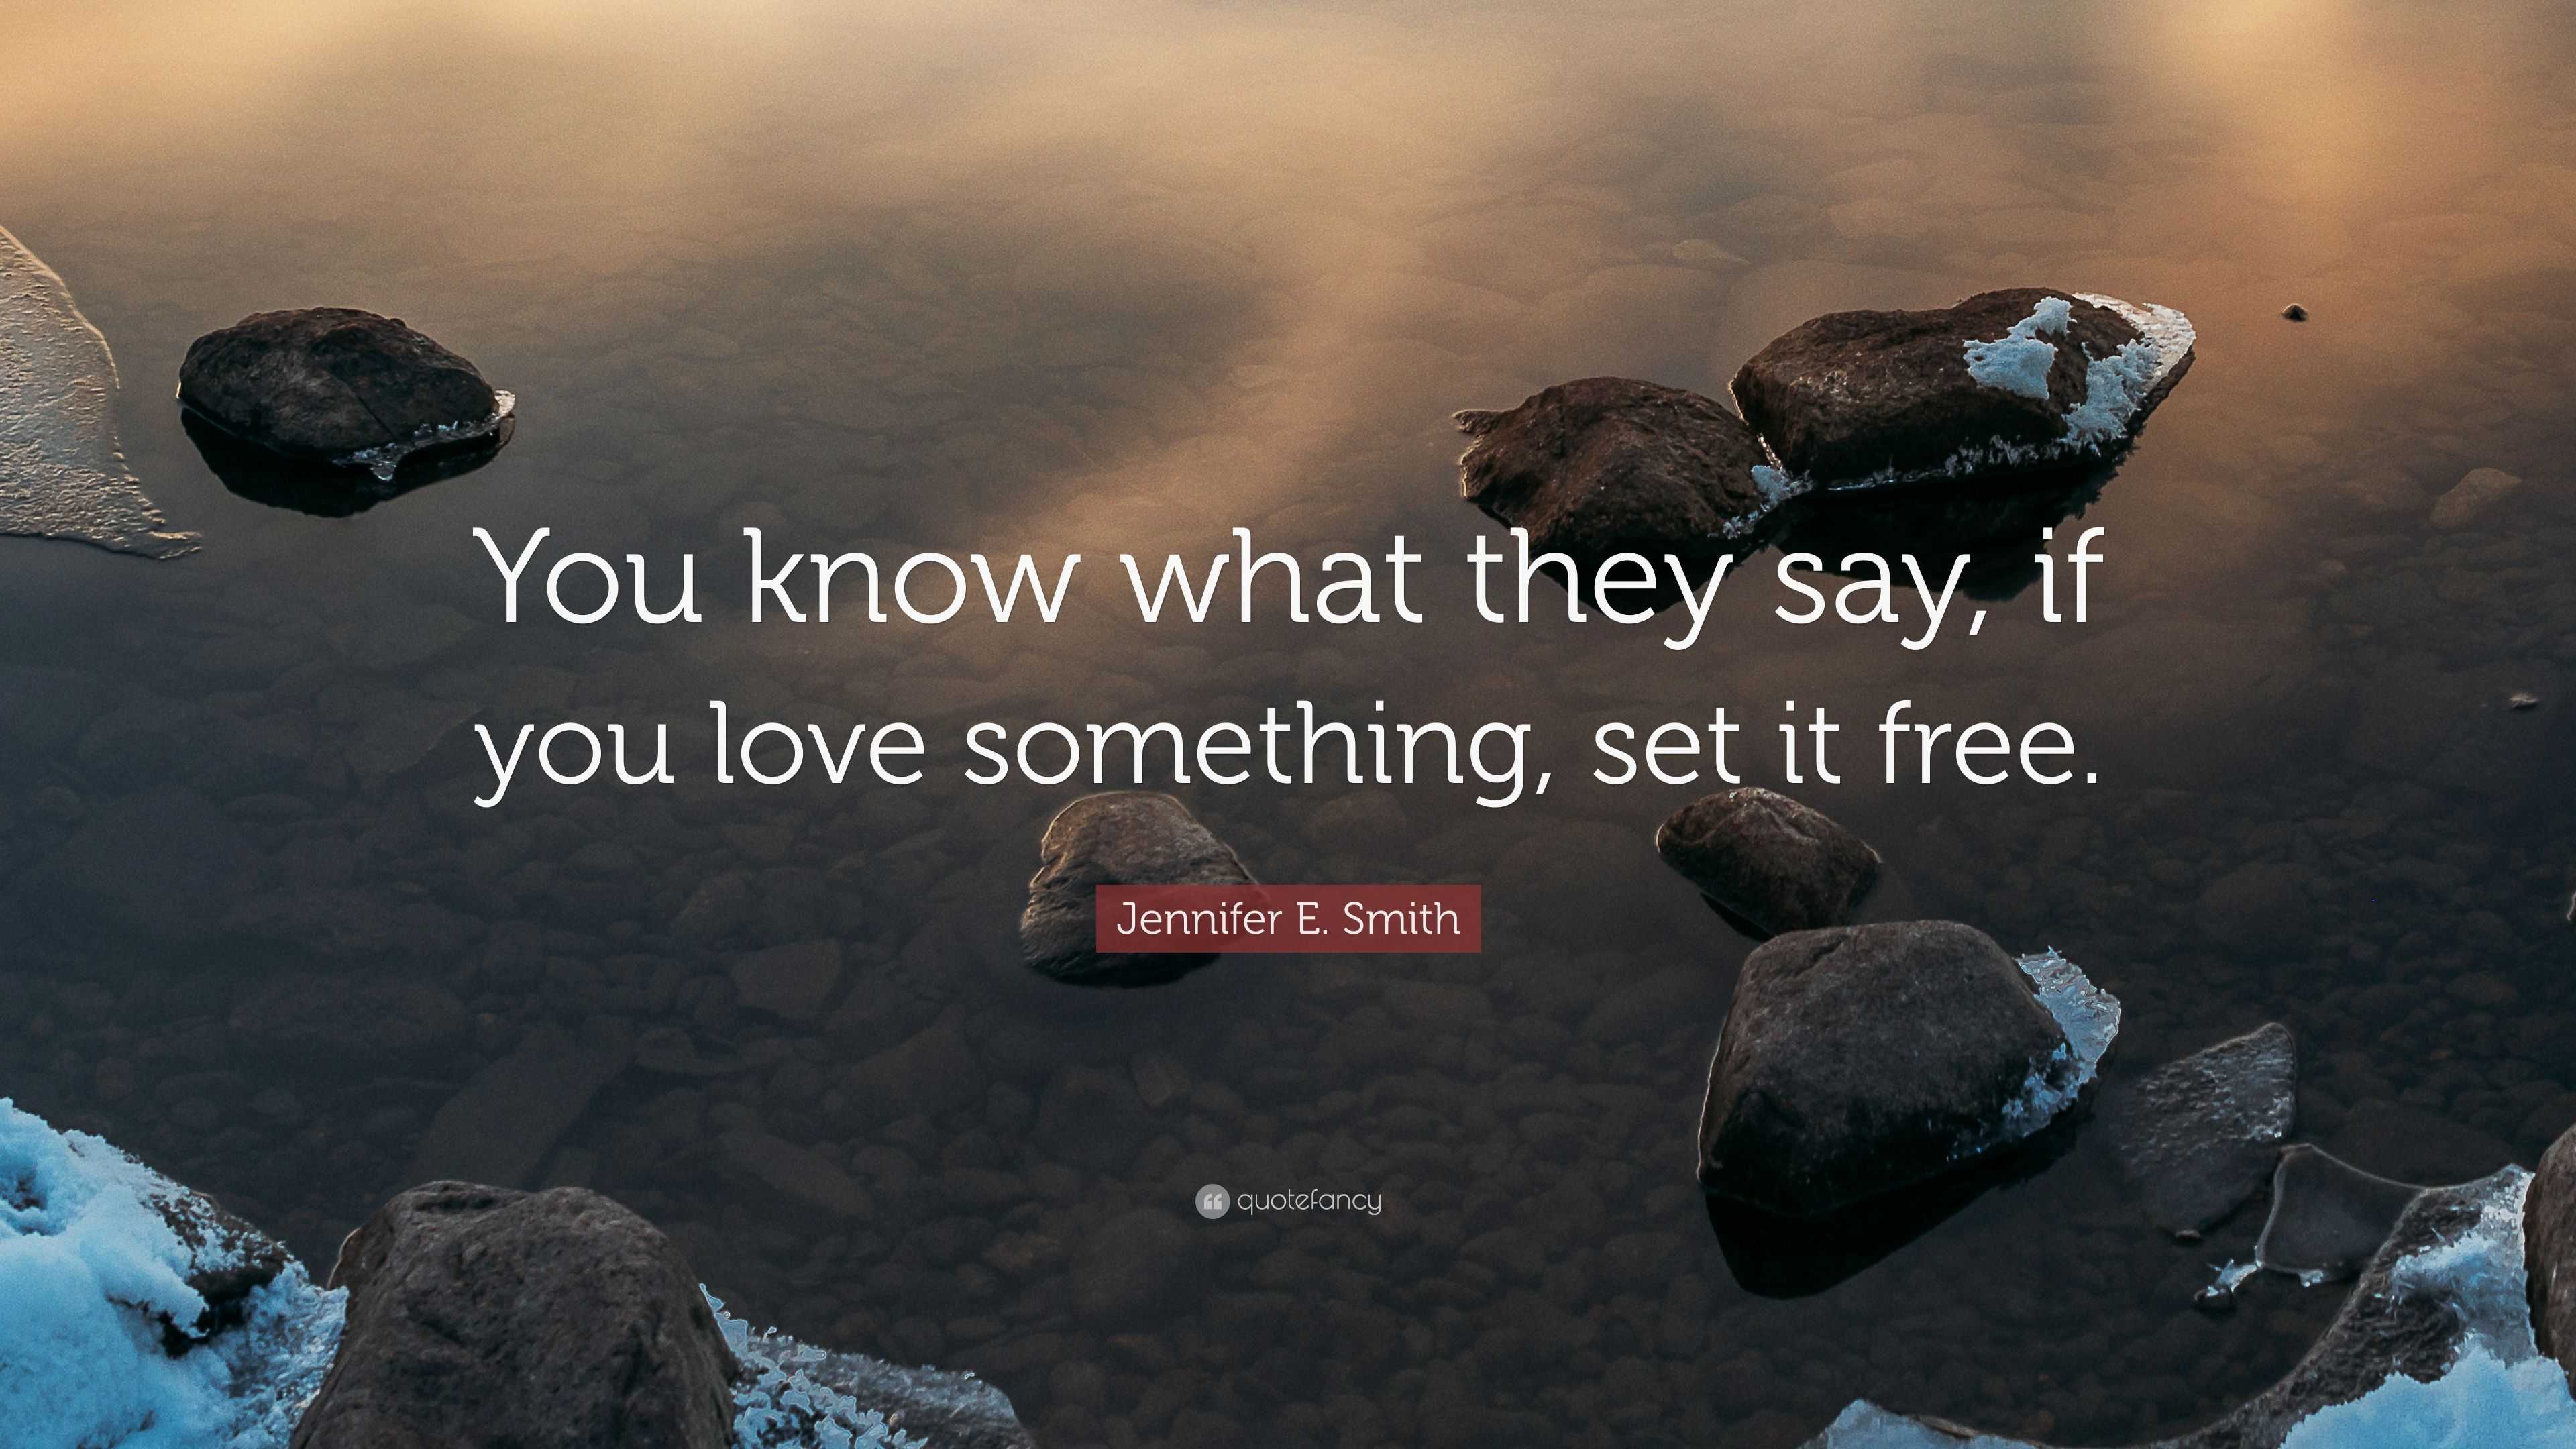 Jennifer E Smith Quote “You know what they say if you love